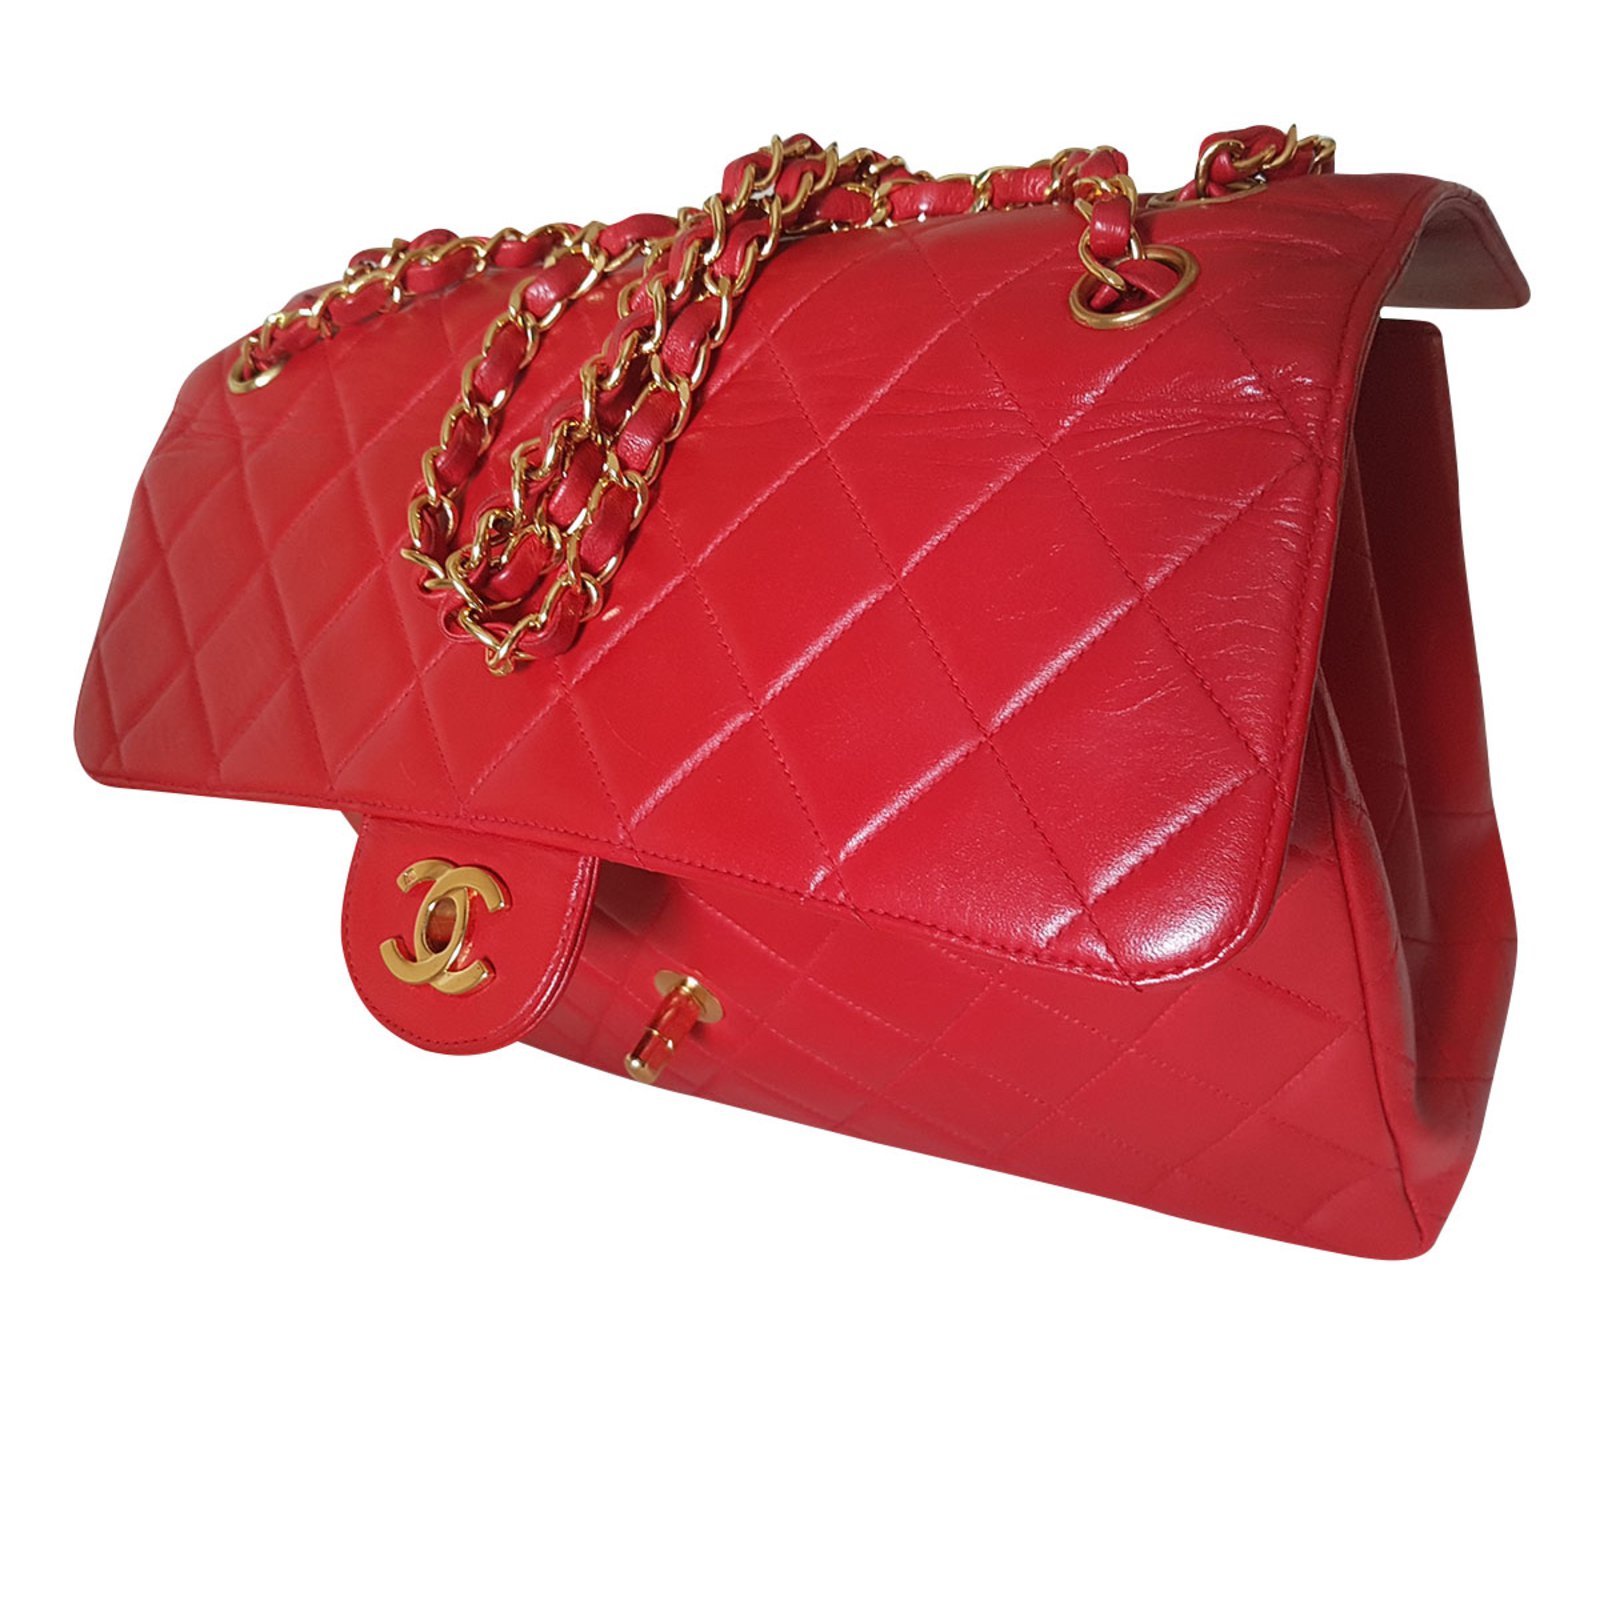 Timeless Chanel Patent Red Jumbo classic flap bag Patent leather